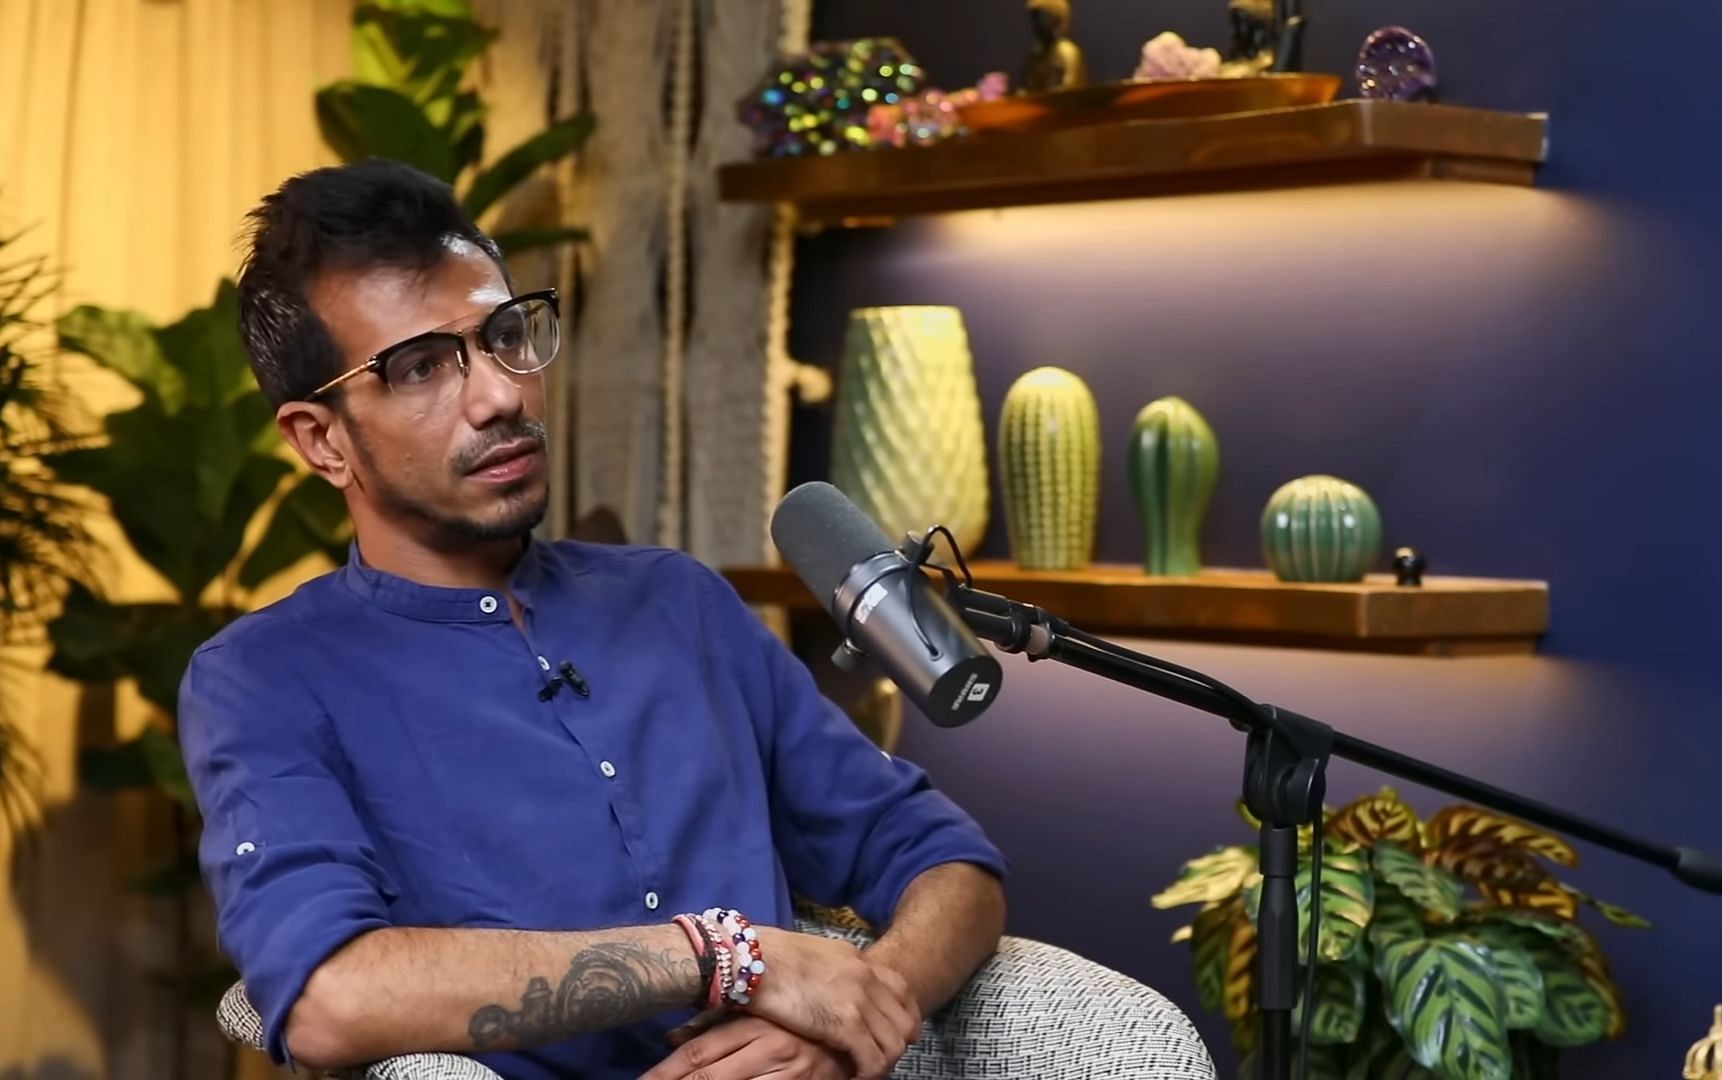 Yuzvendra Chahal during an interview with Ranveer Allahbadia [P.C: YouTube]